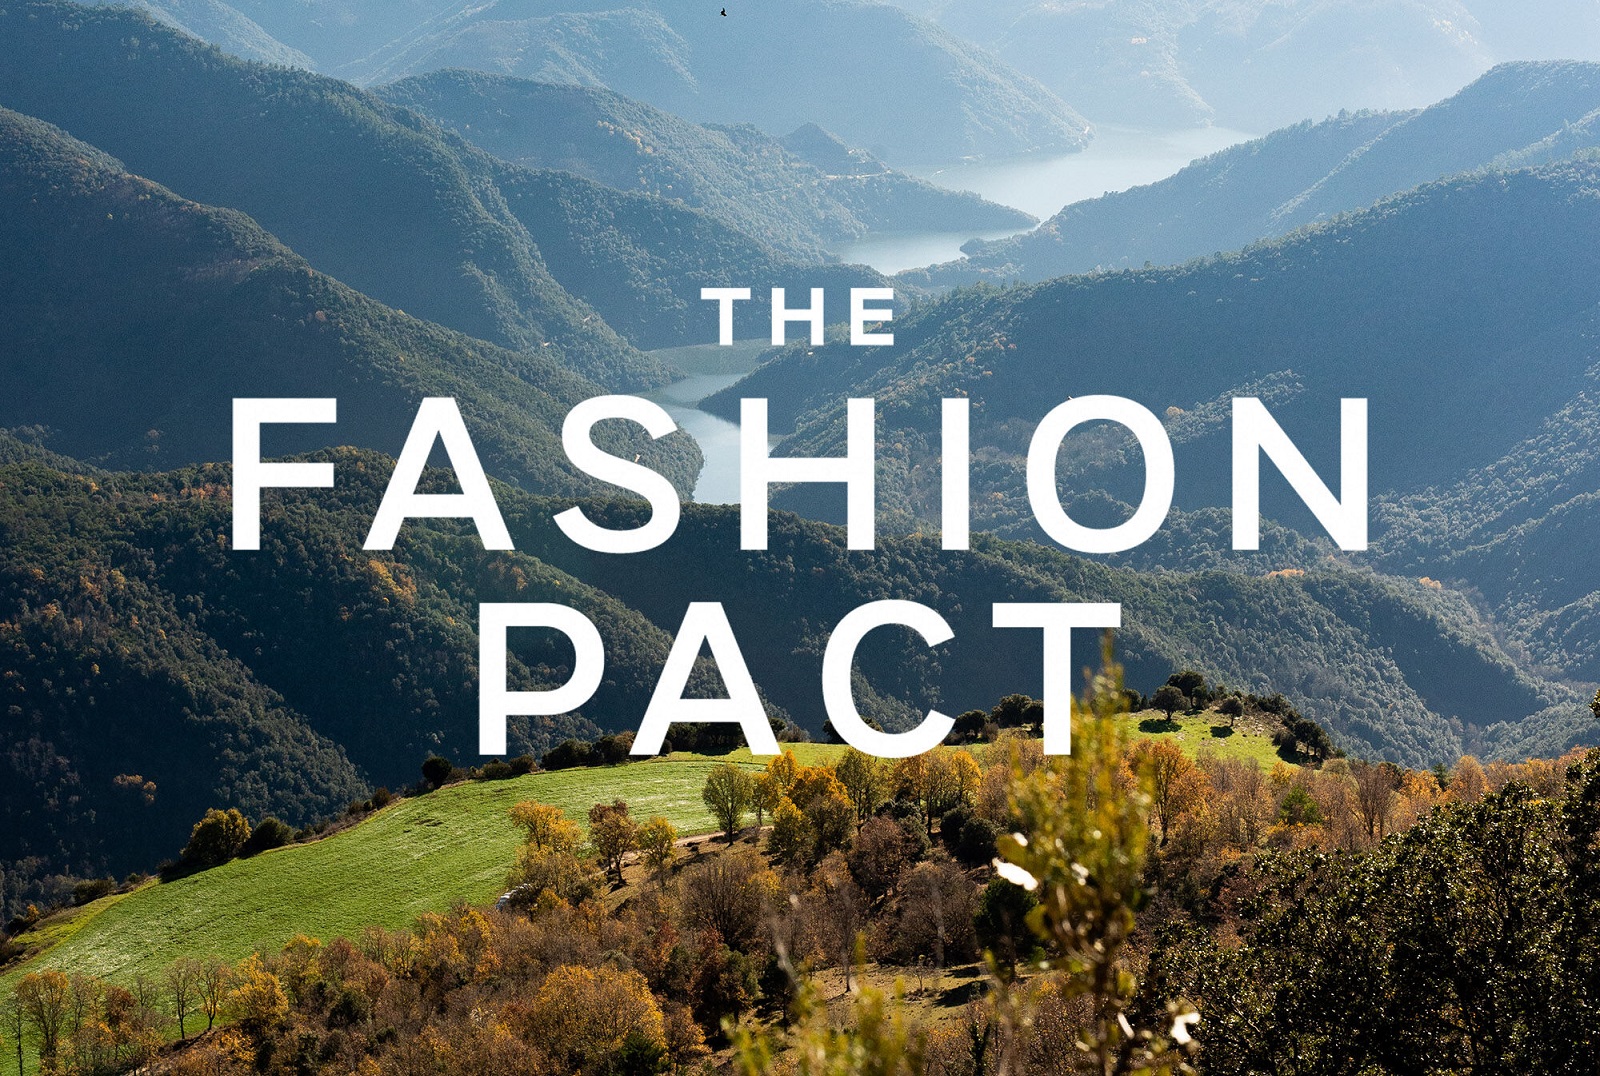 The fashion pact